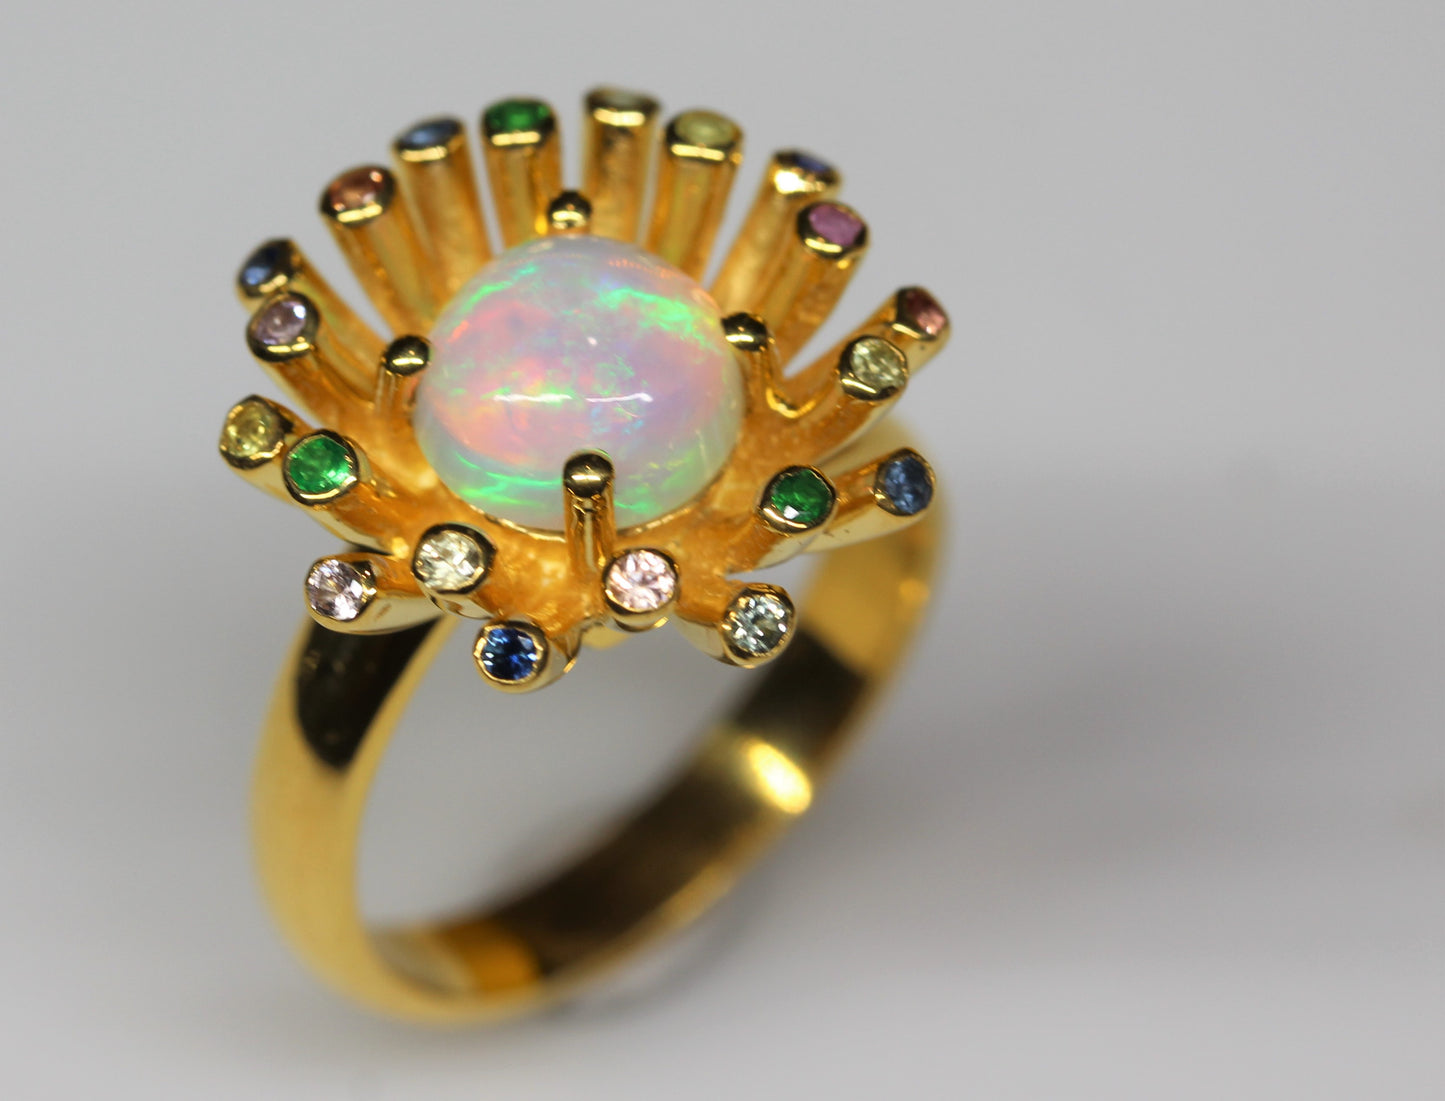 Opal Ring - 24k Gold Plated - Gemstone Accents - Adjustable Size #283